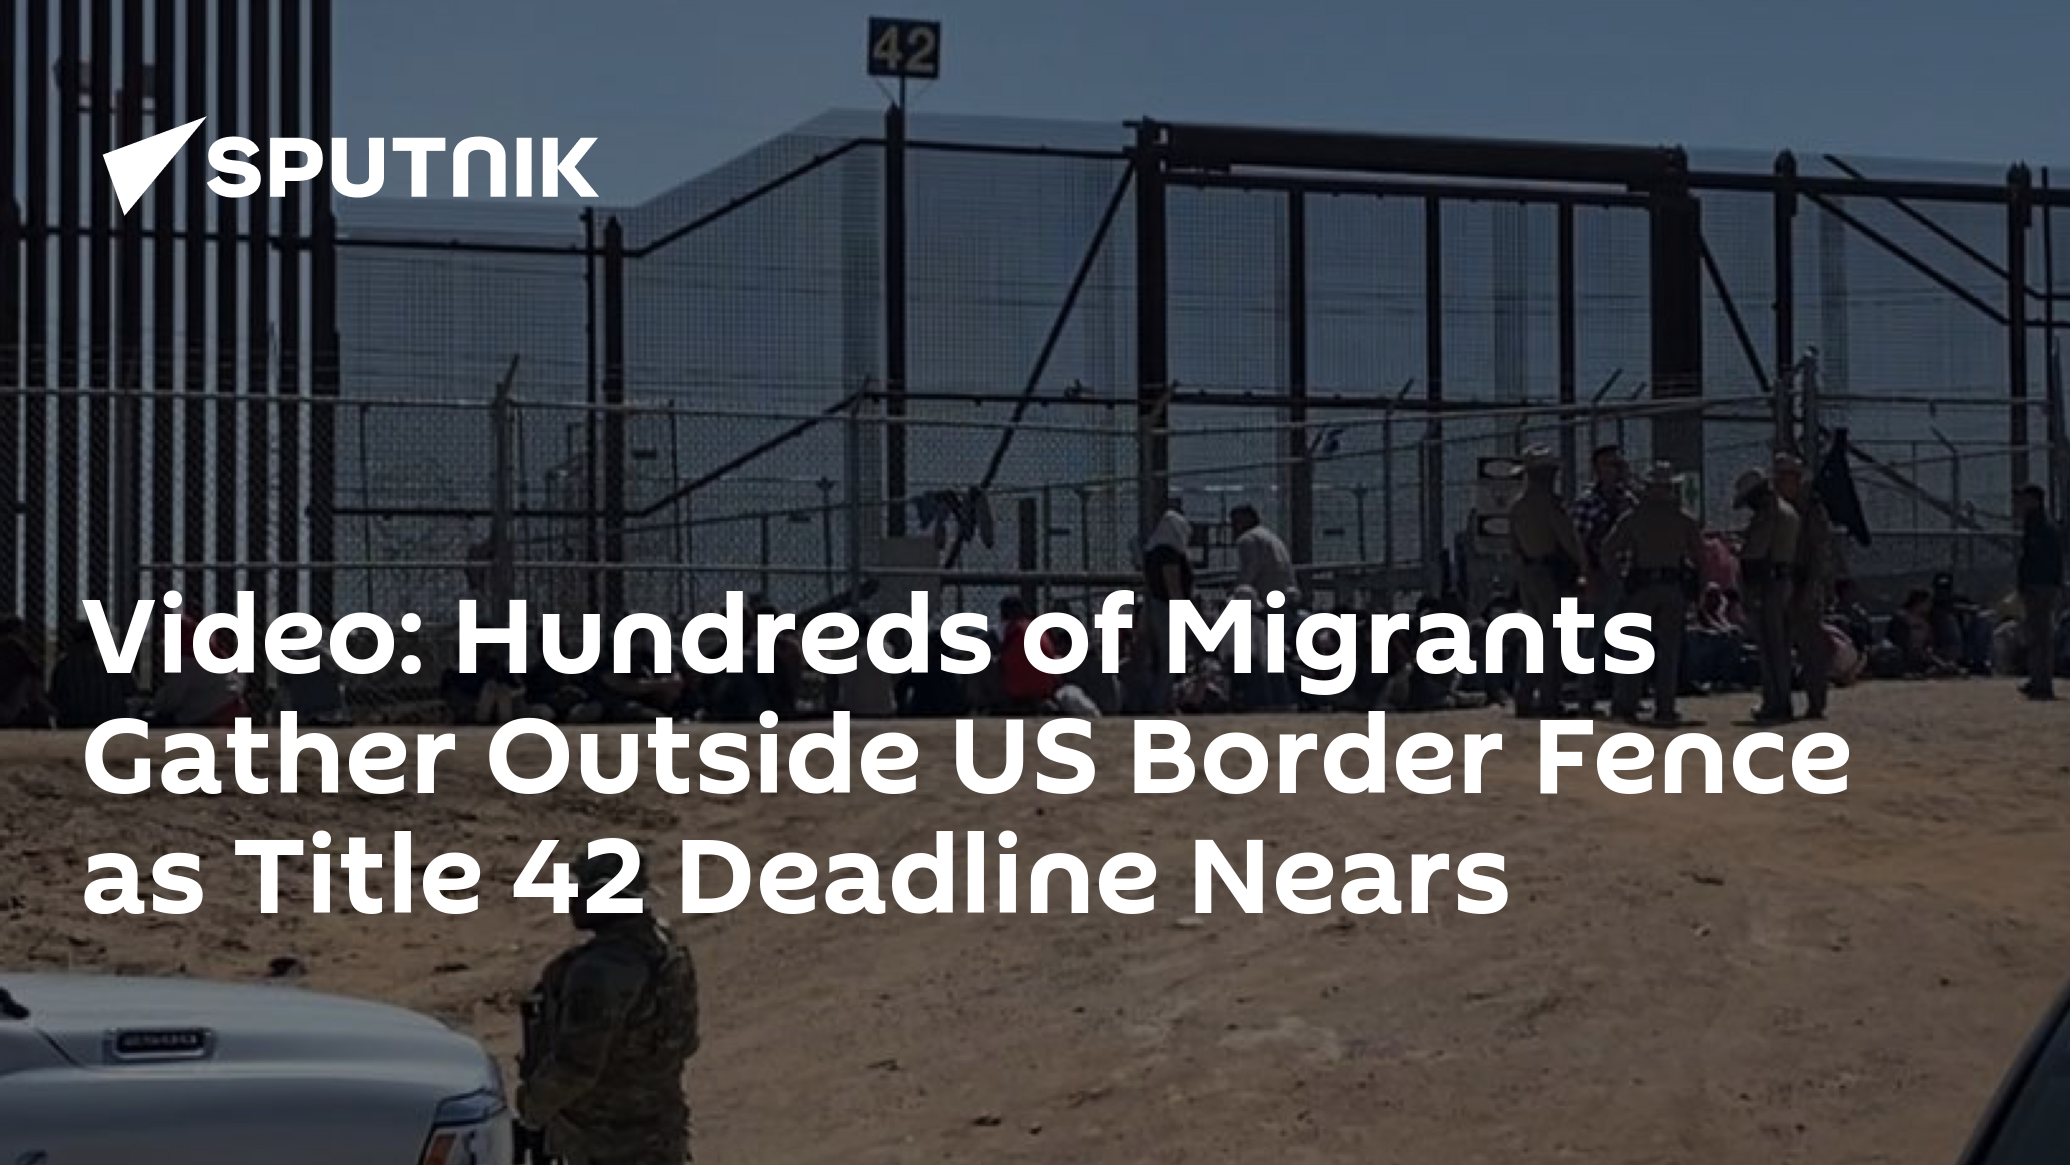 Hundreds of Migrants Gather Outside US Border Fence as Title 42 Deadline Nears